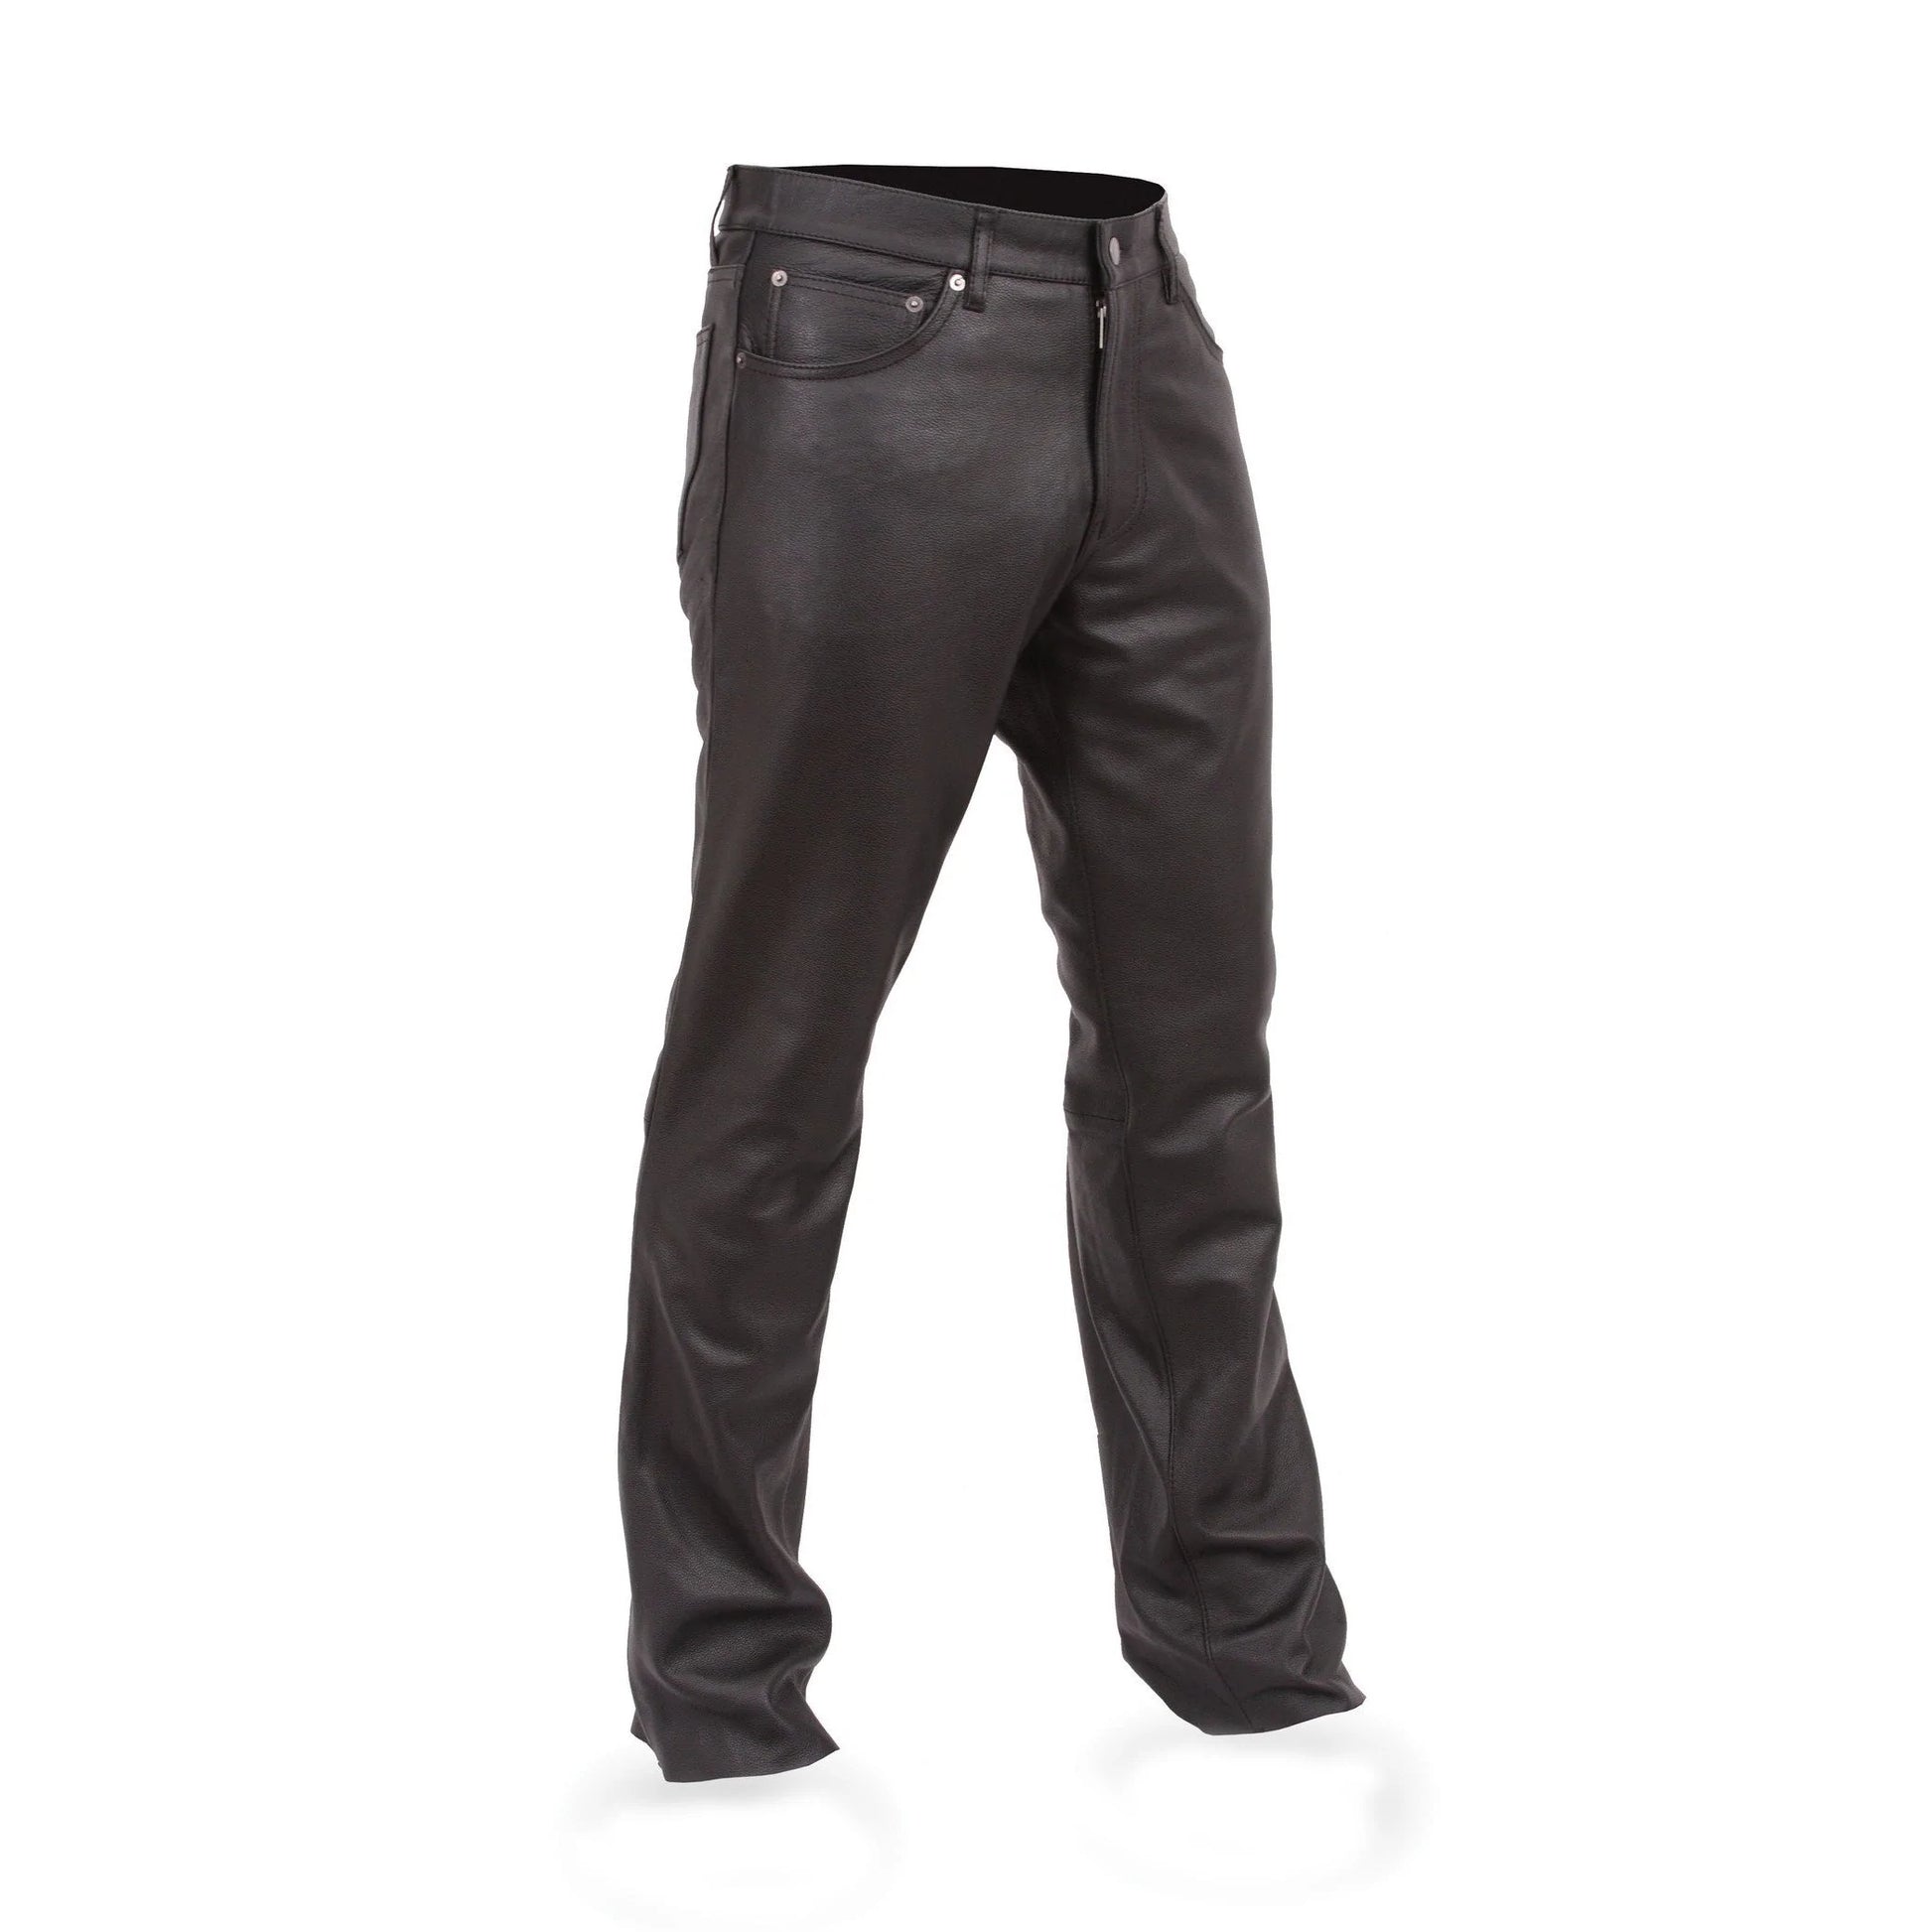 Commander Black Leather Motorcycle Riding Pants with Pockets